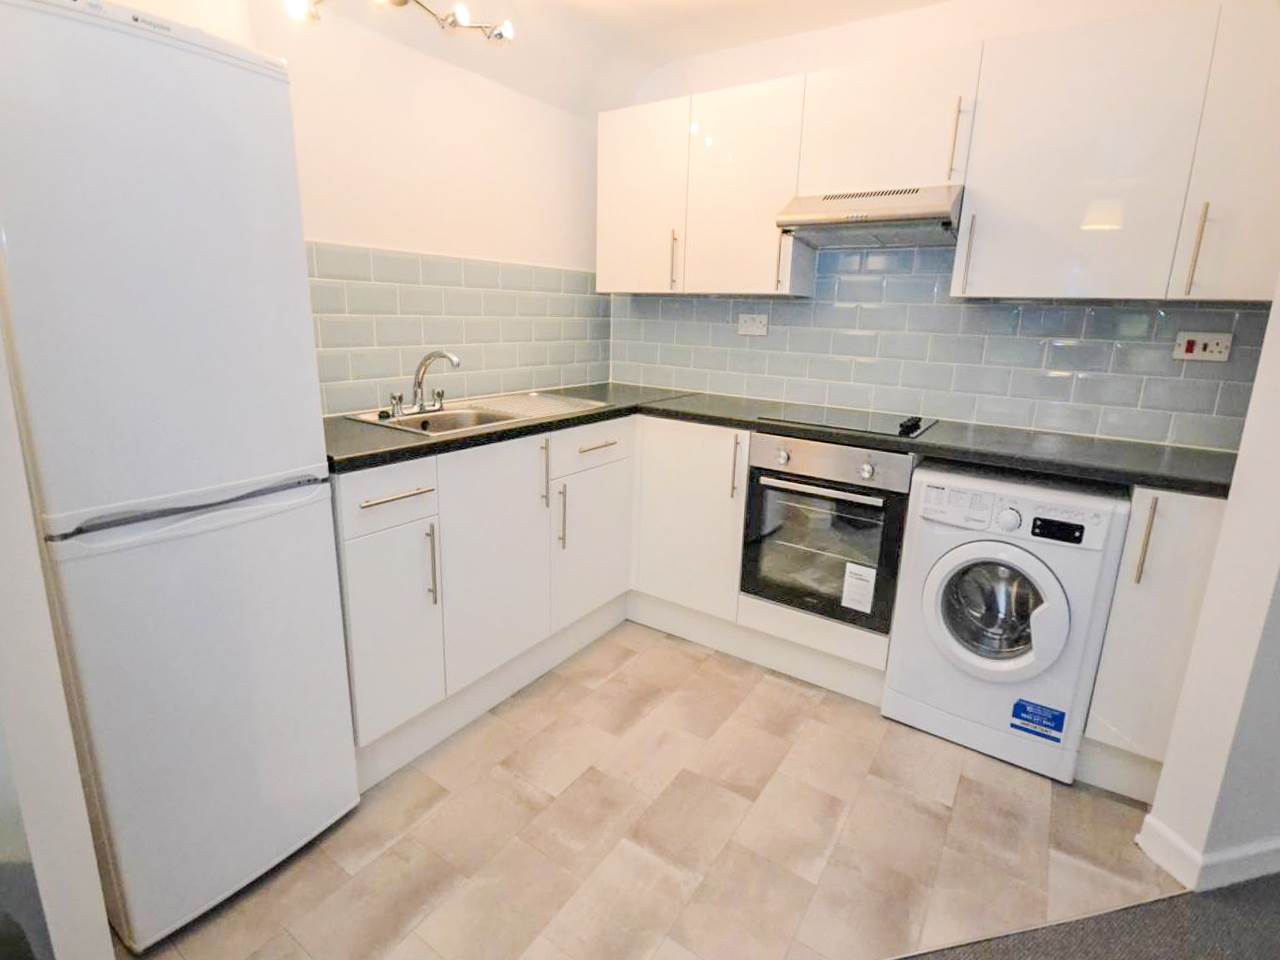 NO CHAIN! PRIVATE ENTRANCE AND PRIVATE PATIO!!* PARKING* CONVENIENT WALK TO TOWN* REFURBISHED STUDIO* NEW KITCHEN* LARGE BATHROOM* VIEW NOW!!
